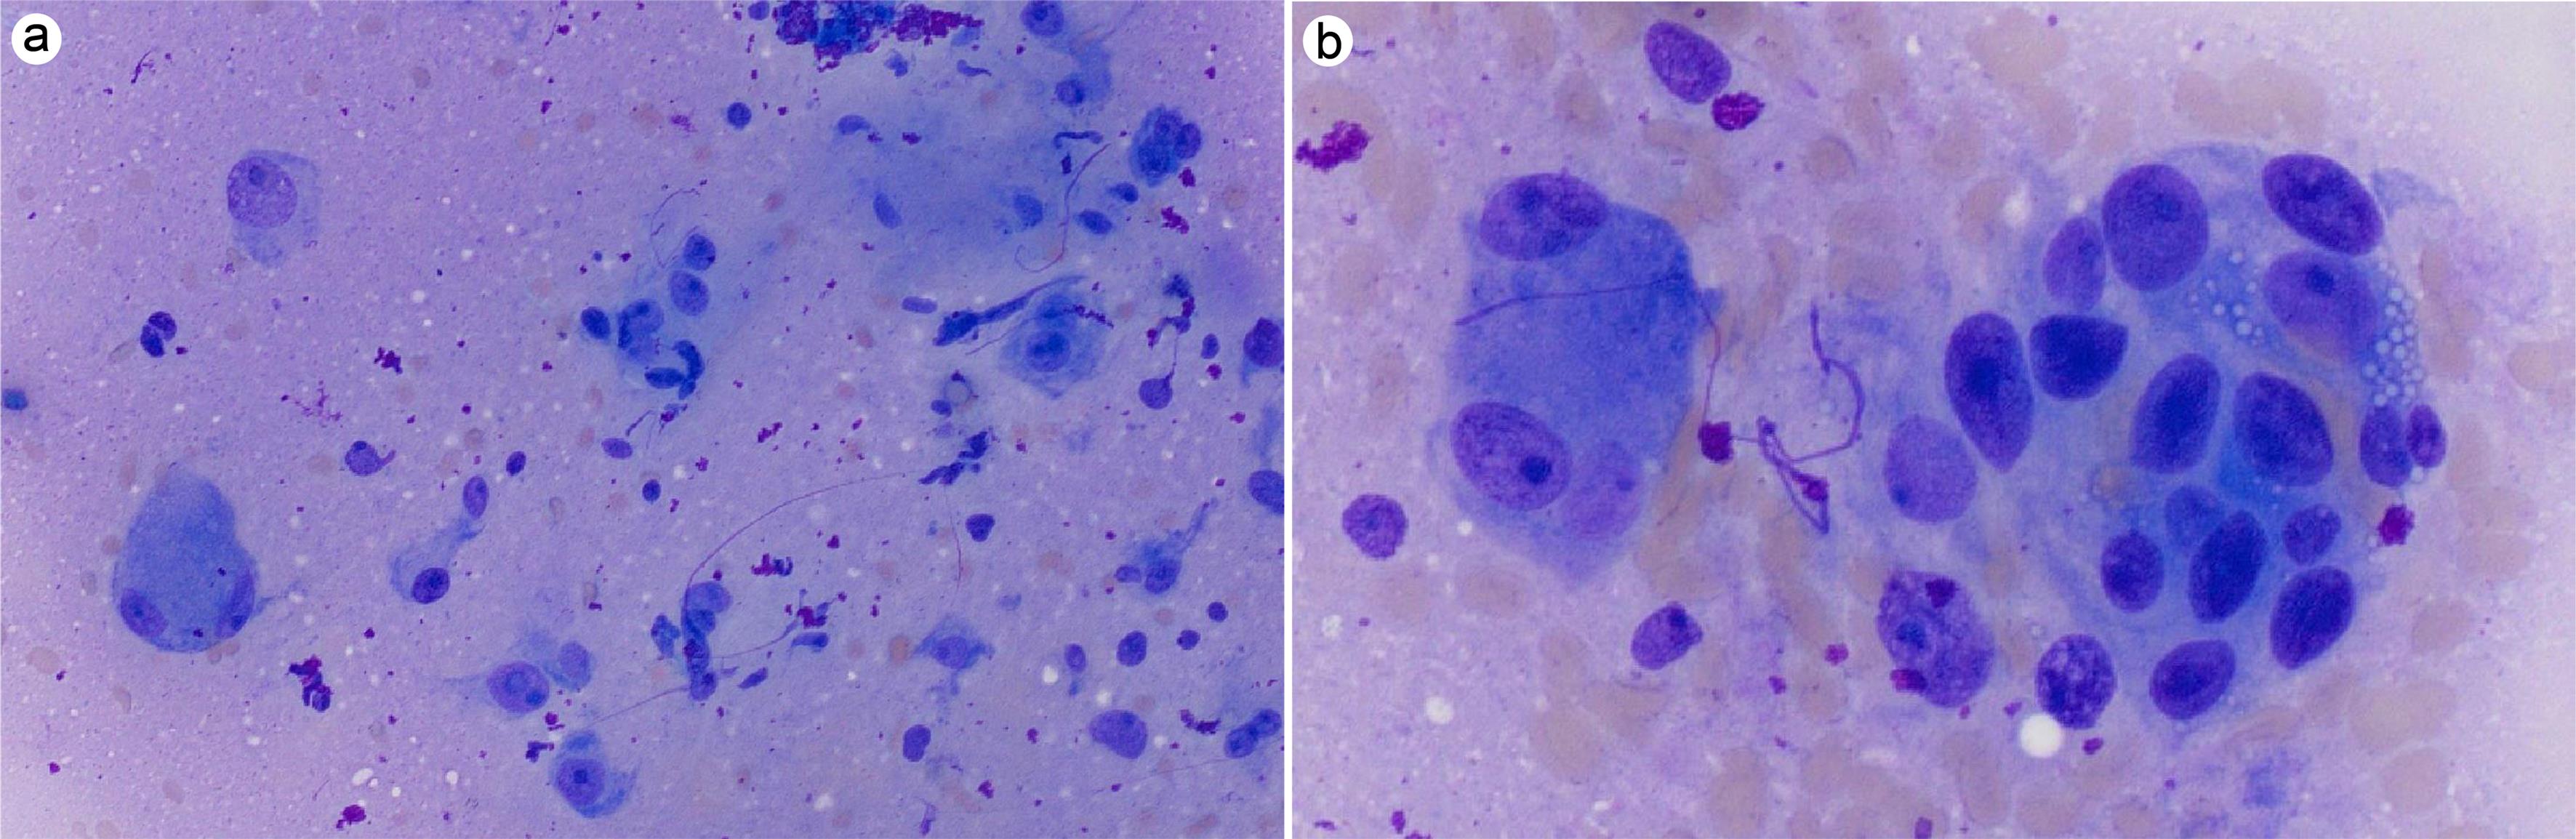 (a) Touch prep Diff-Quick staining shows numerous multinucleated giant cells, some of which have between 10 and 20 nuclei. (b) These nuclei typically have smooth nuclear membranes and prominent nucleoli.